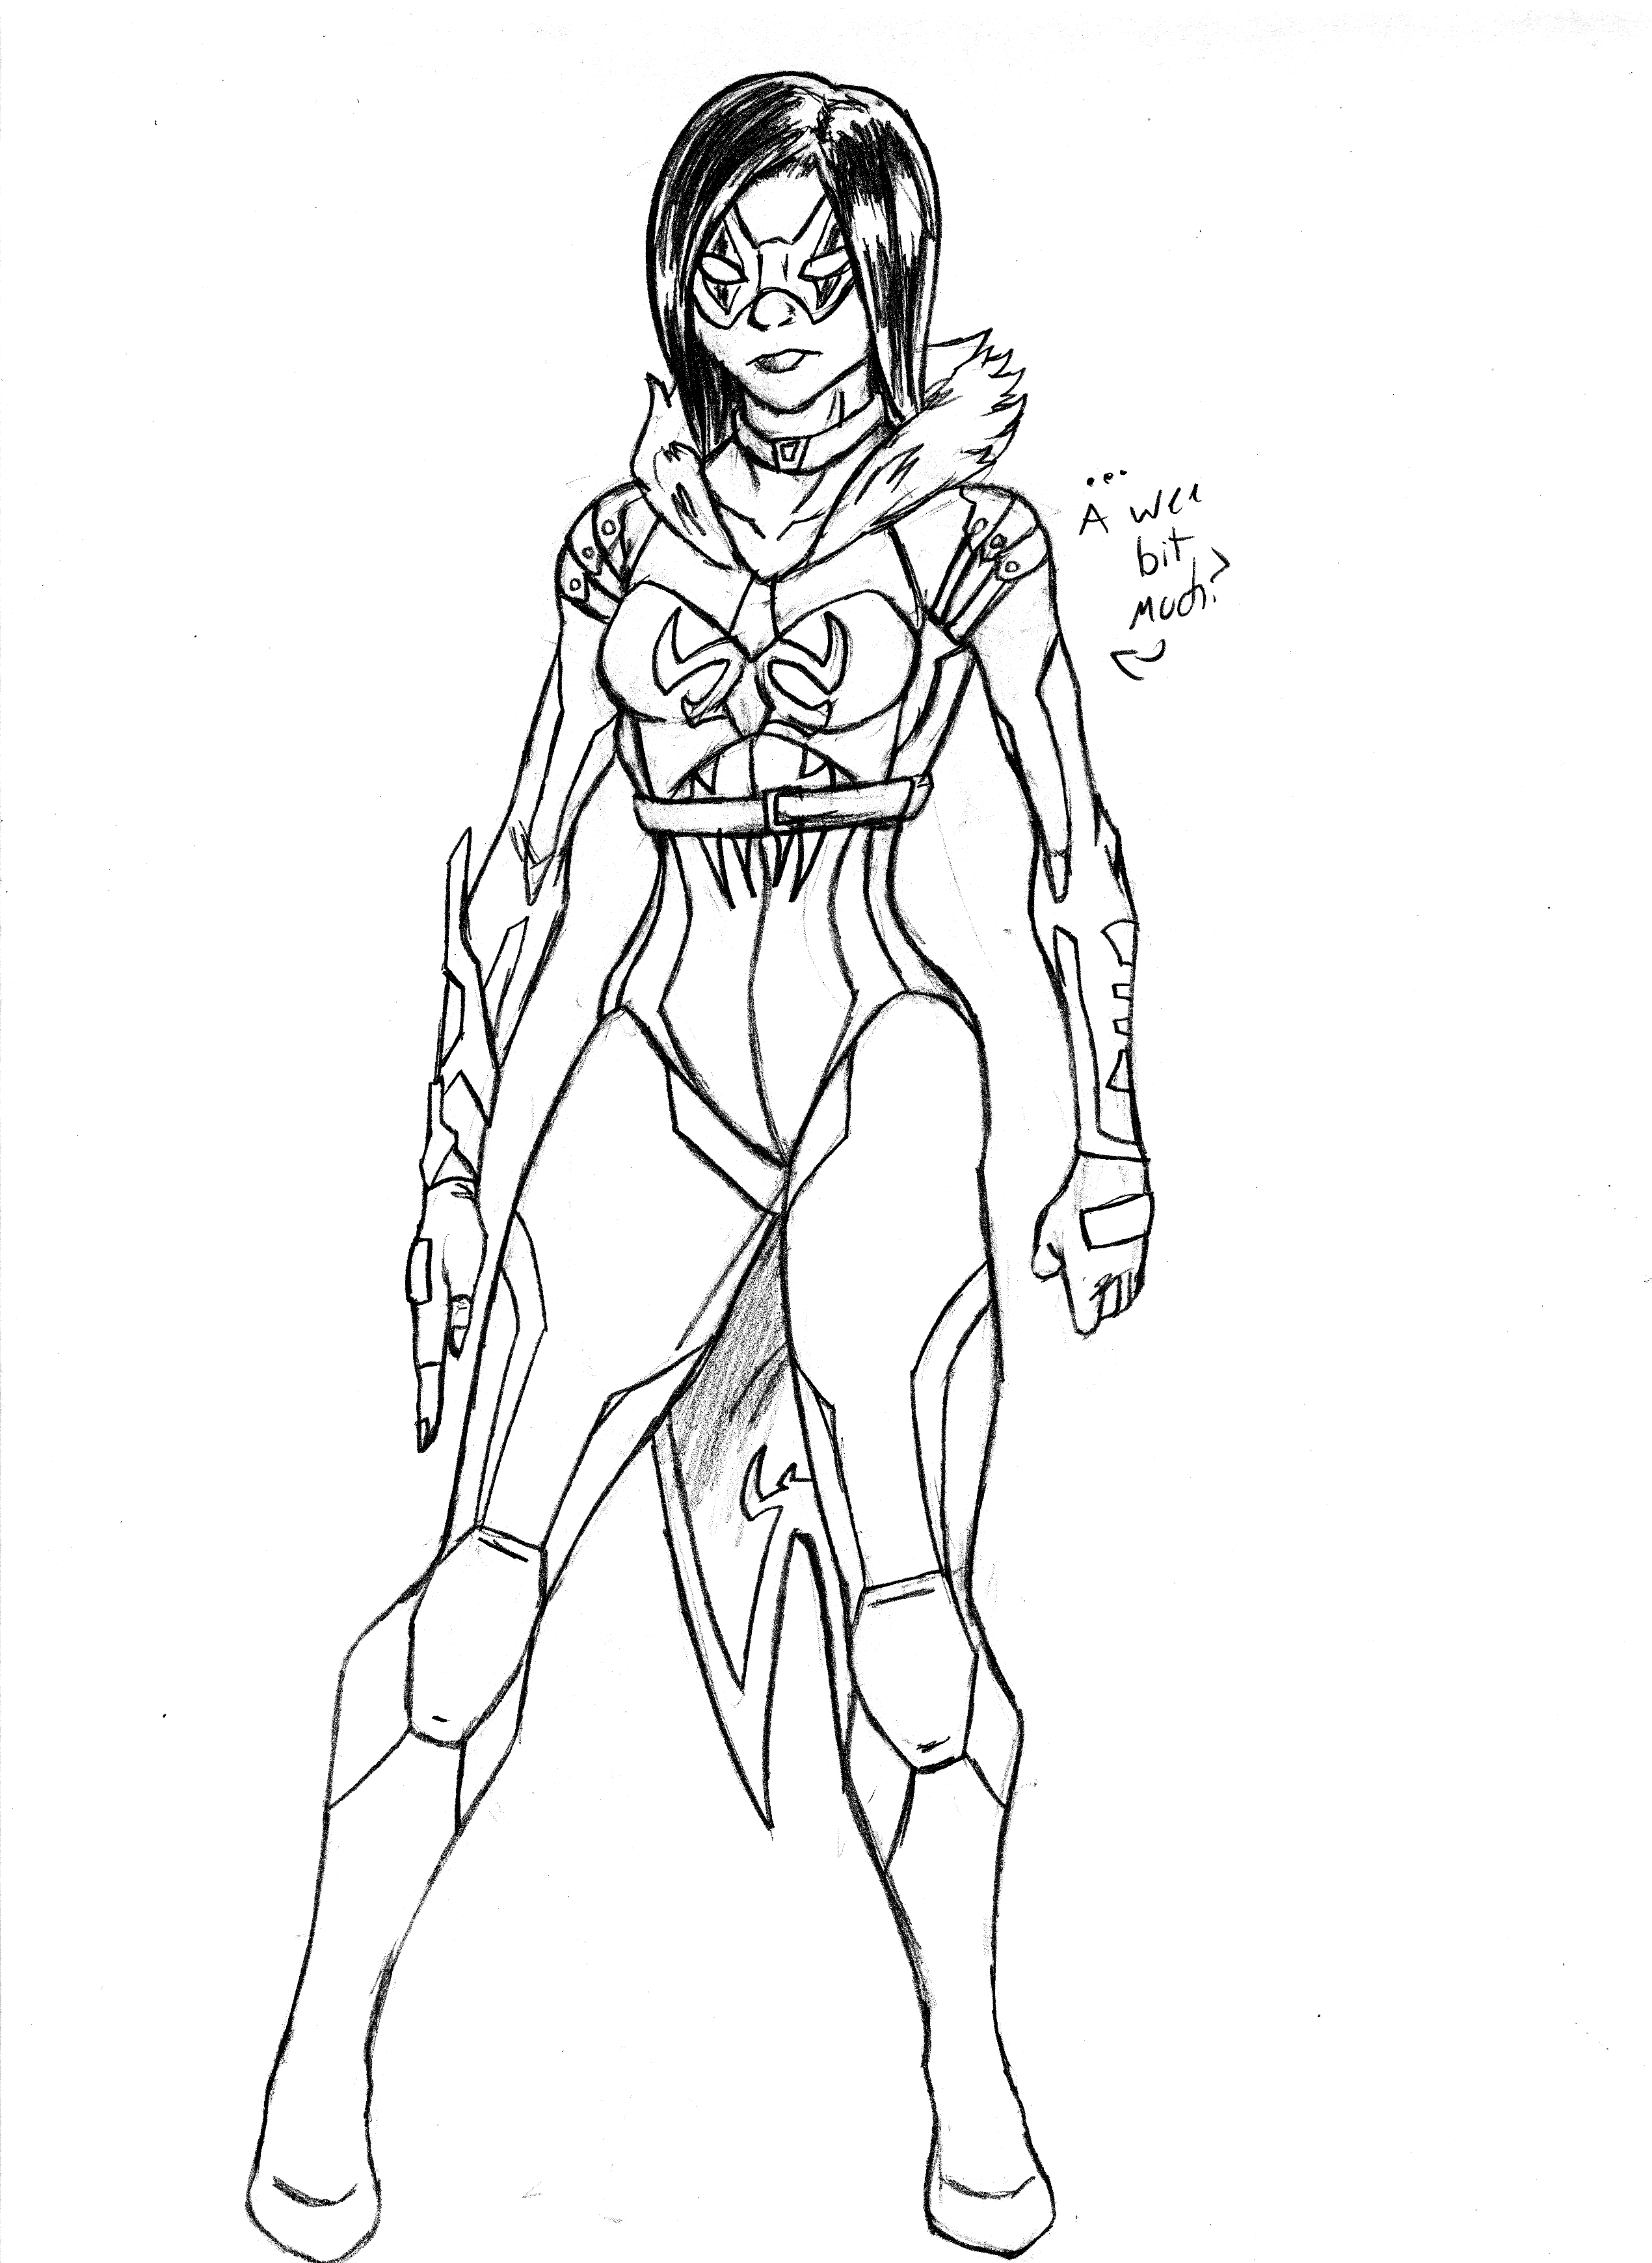 Spider Woman Coloring Pages at GetDrawings.com | Free for ...